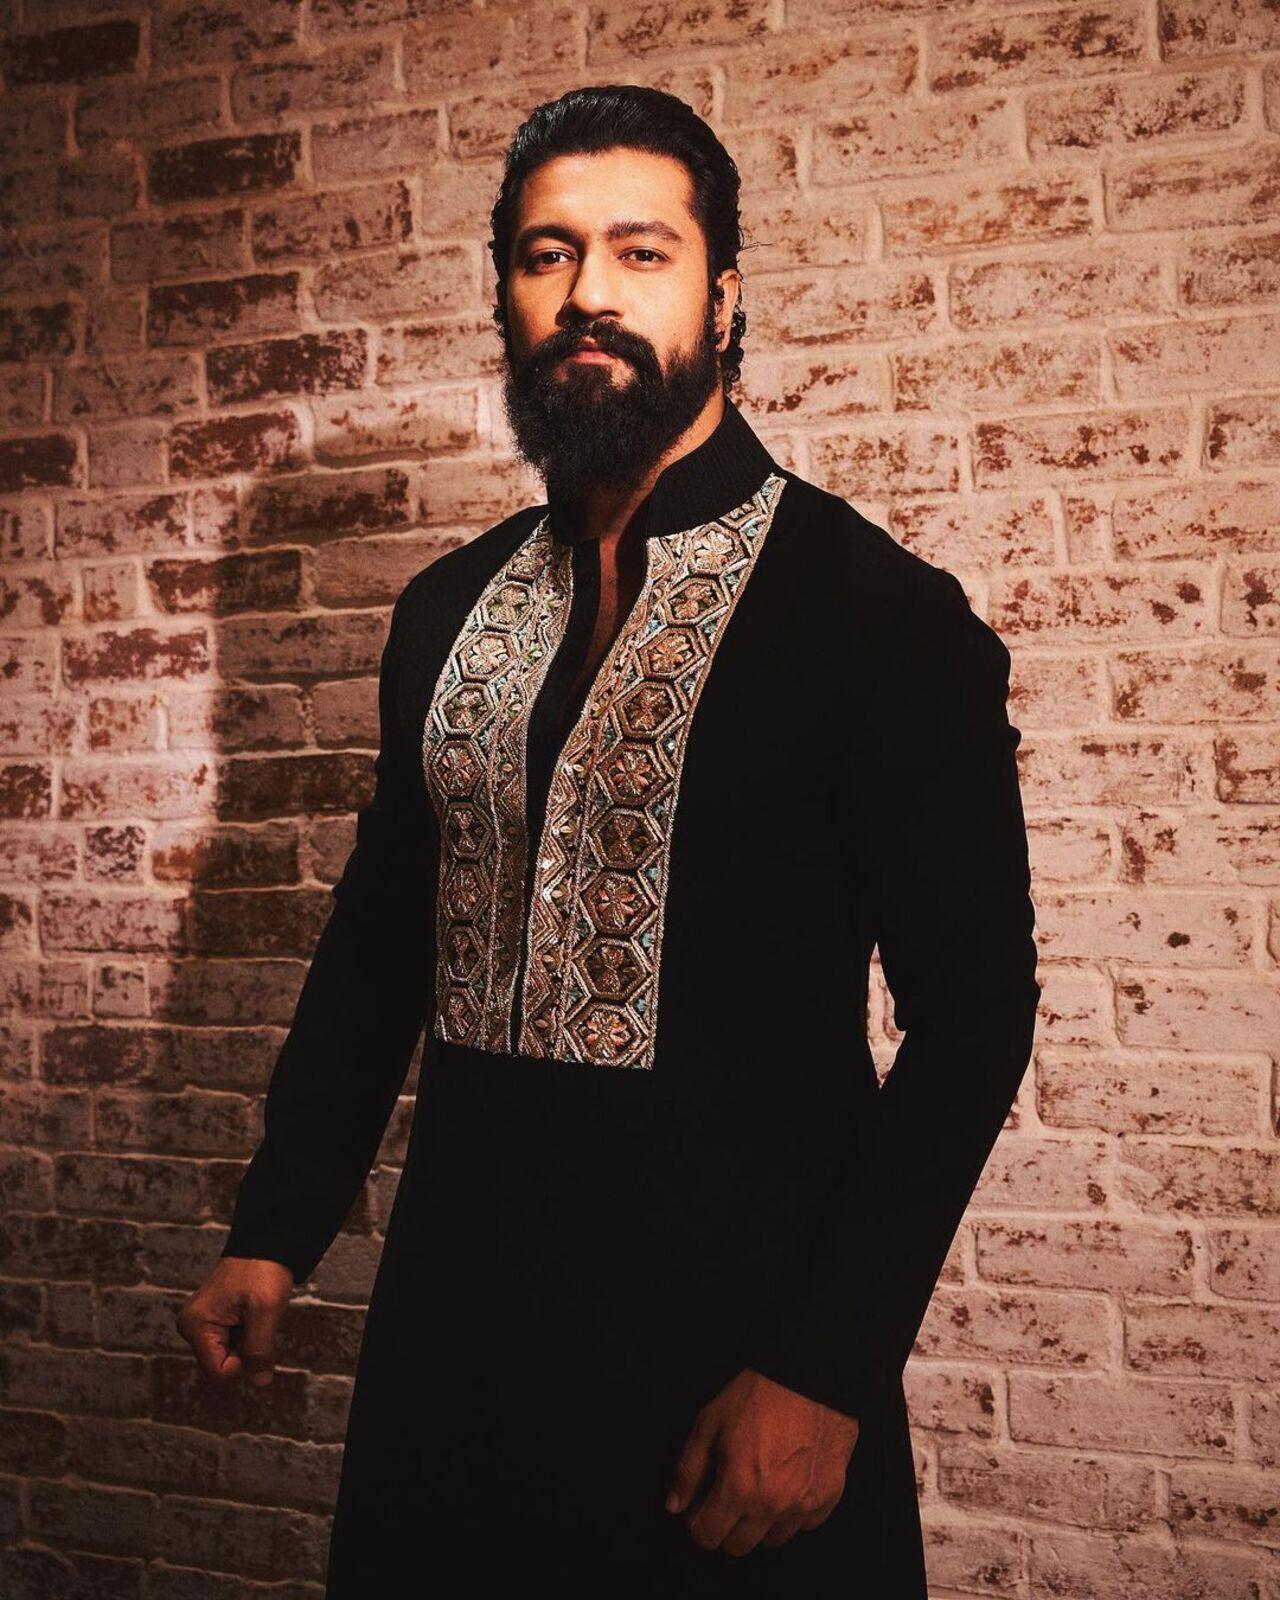 Vicky Kaushal looked dapper in a black and golden kurta for a Diwali party. Sporting his neatly styled long locks, the actor made heads turn